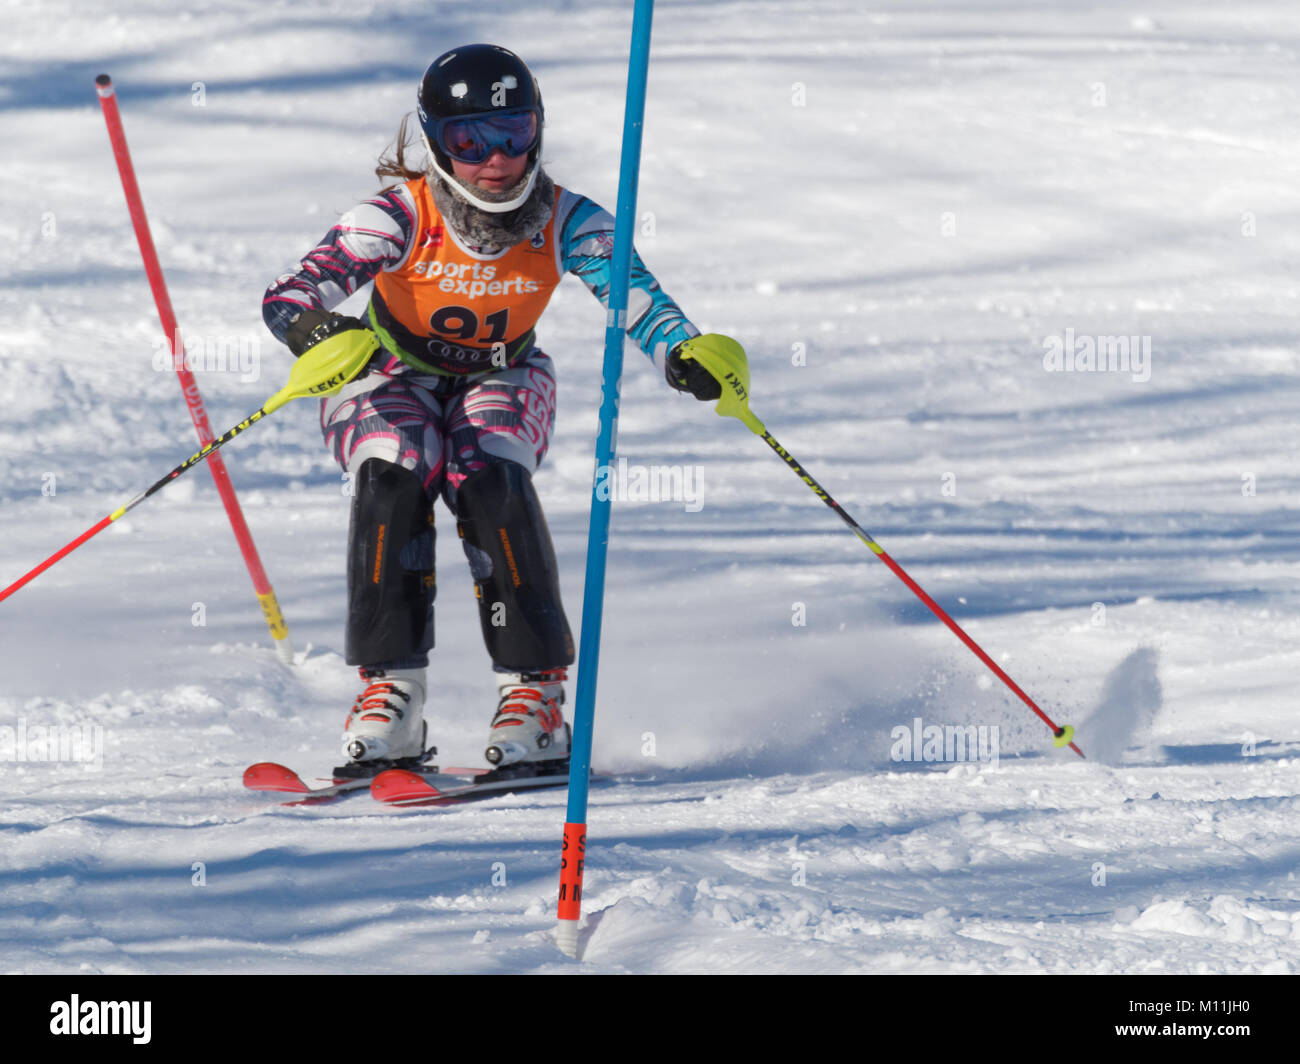 Val Saint-Come,Canada 1/14/2018. Alizee Laperriere of Canada for Sommets Saint-Sauveur ski club competes  at the Super Serie Sports Experts women slal Stock Photo